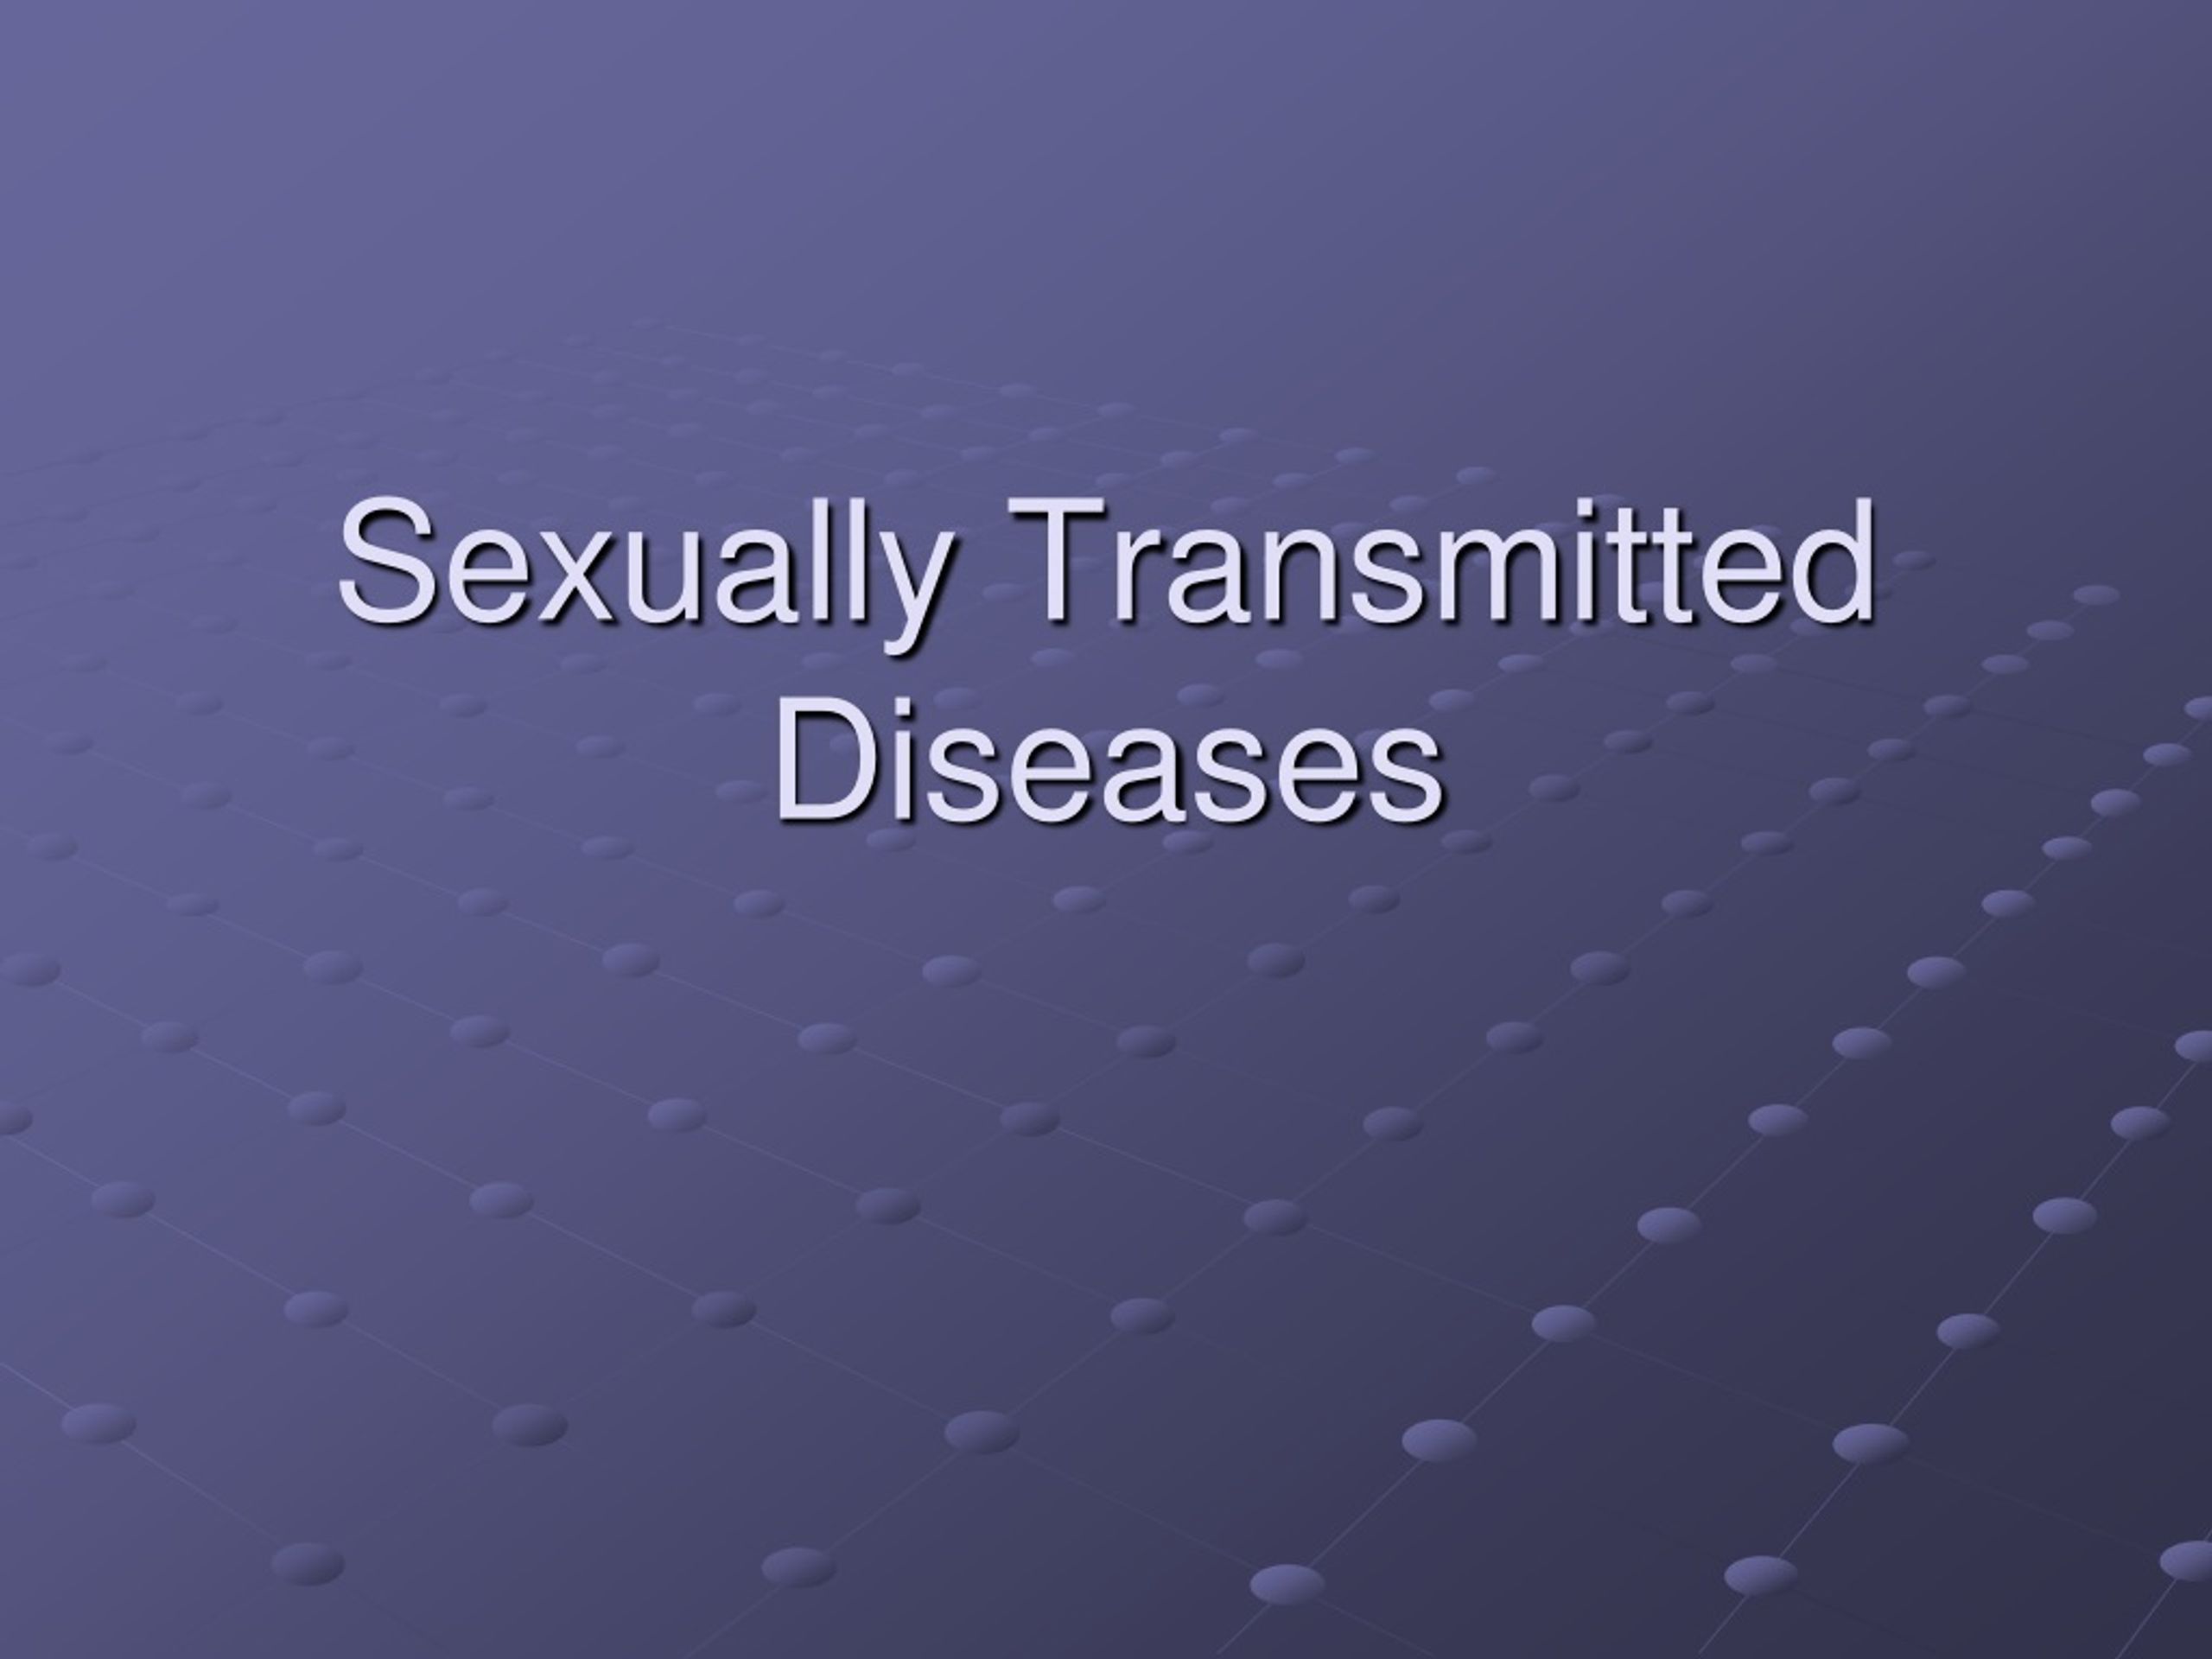 Ppt Sexually Transmitted Diseases Powerpoint Presentation Free Download Id8705723 6063